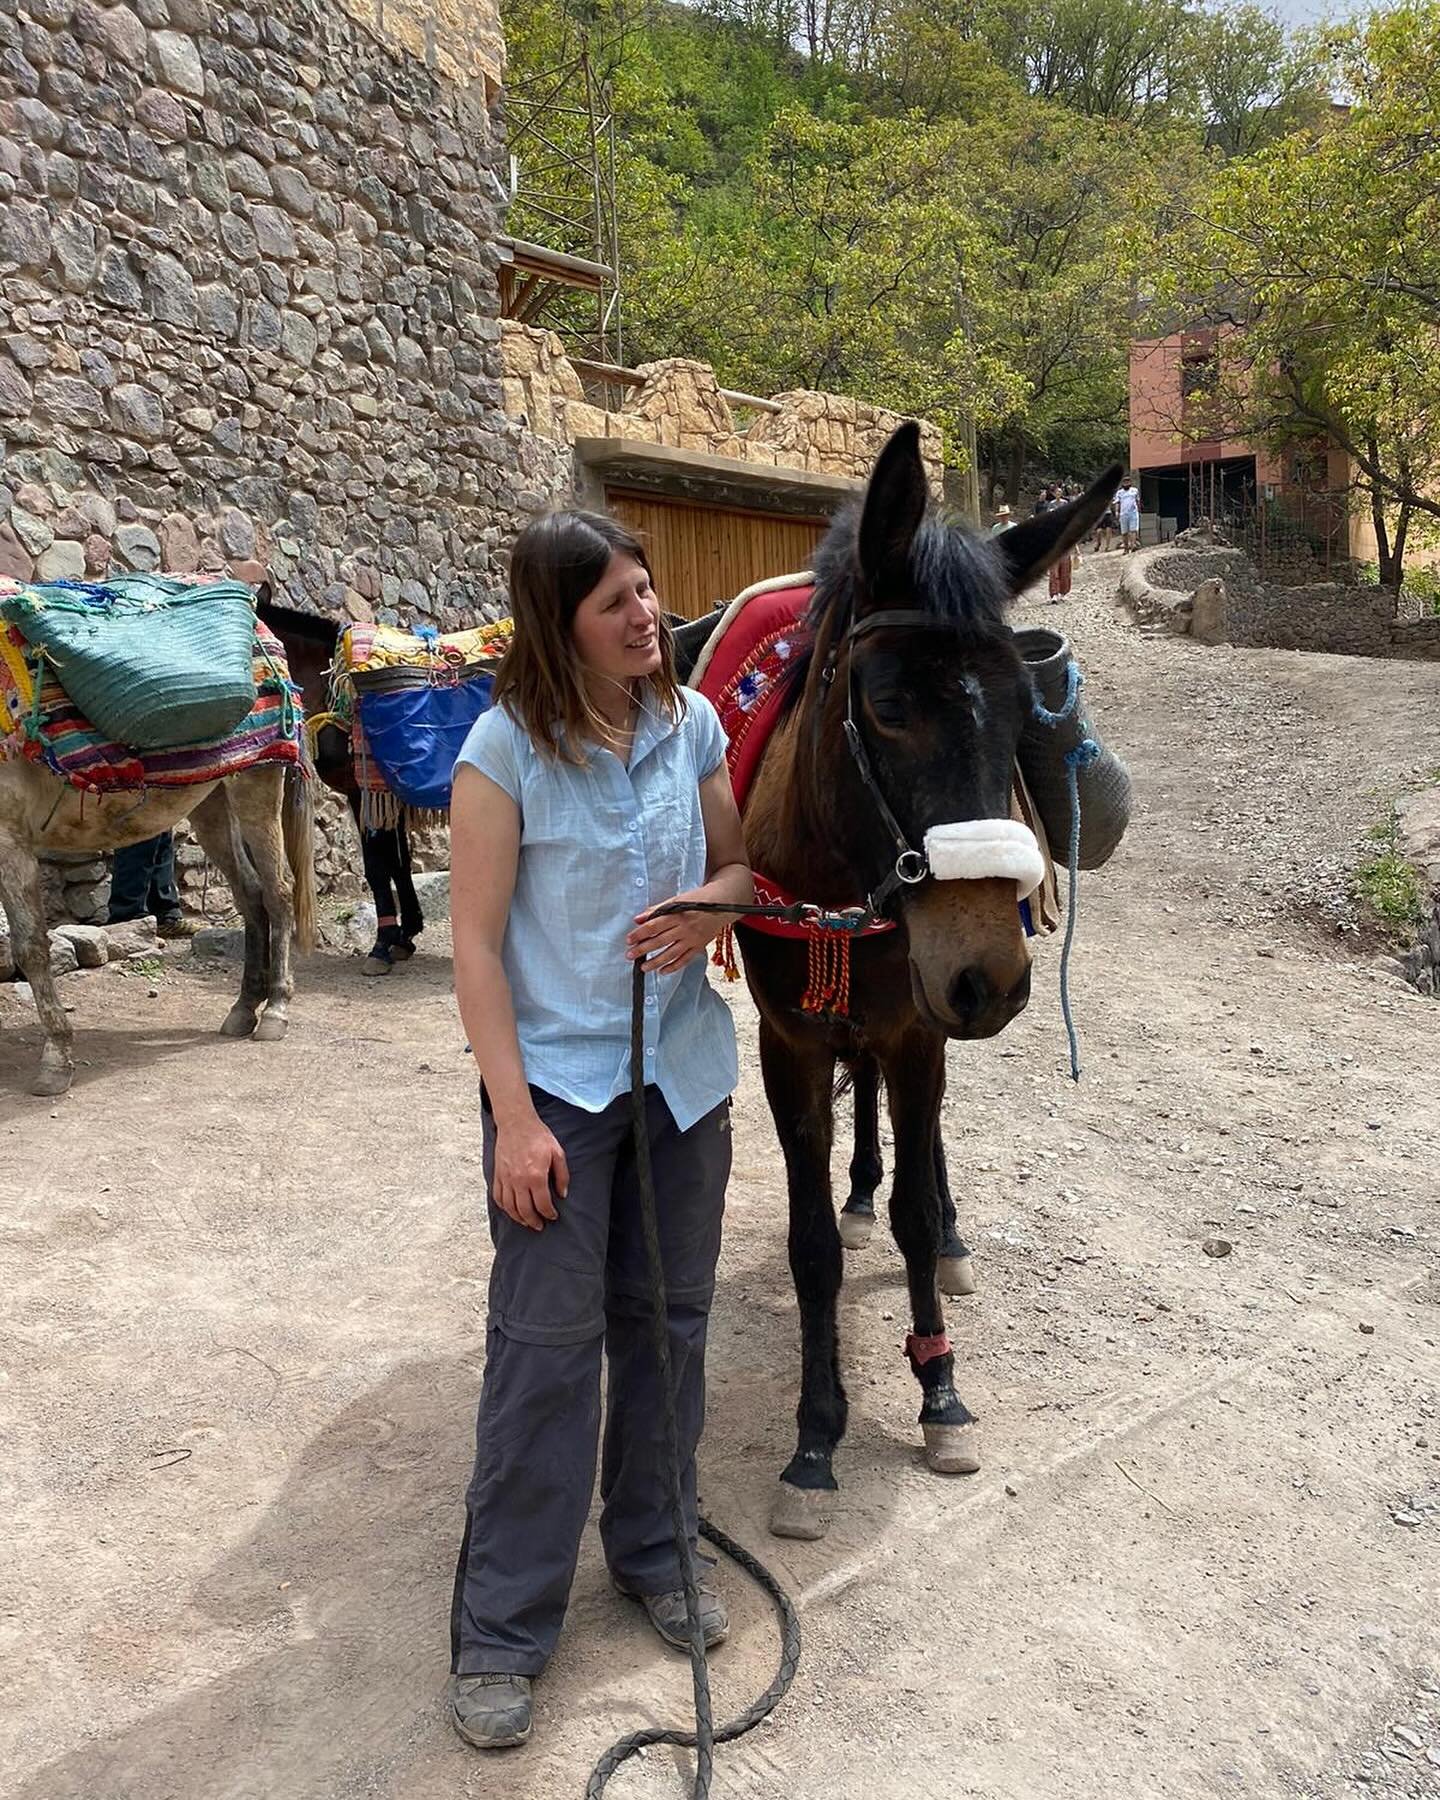 Lovely photographs from Ellen today who is up in Imlil? She sent the attached message - &quot;Tosca&rsquo;s replacement! The head collar/bitless bridle I gave him for her looks well used and he said it&rsquo;s working well. The noseband cover is new 